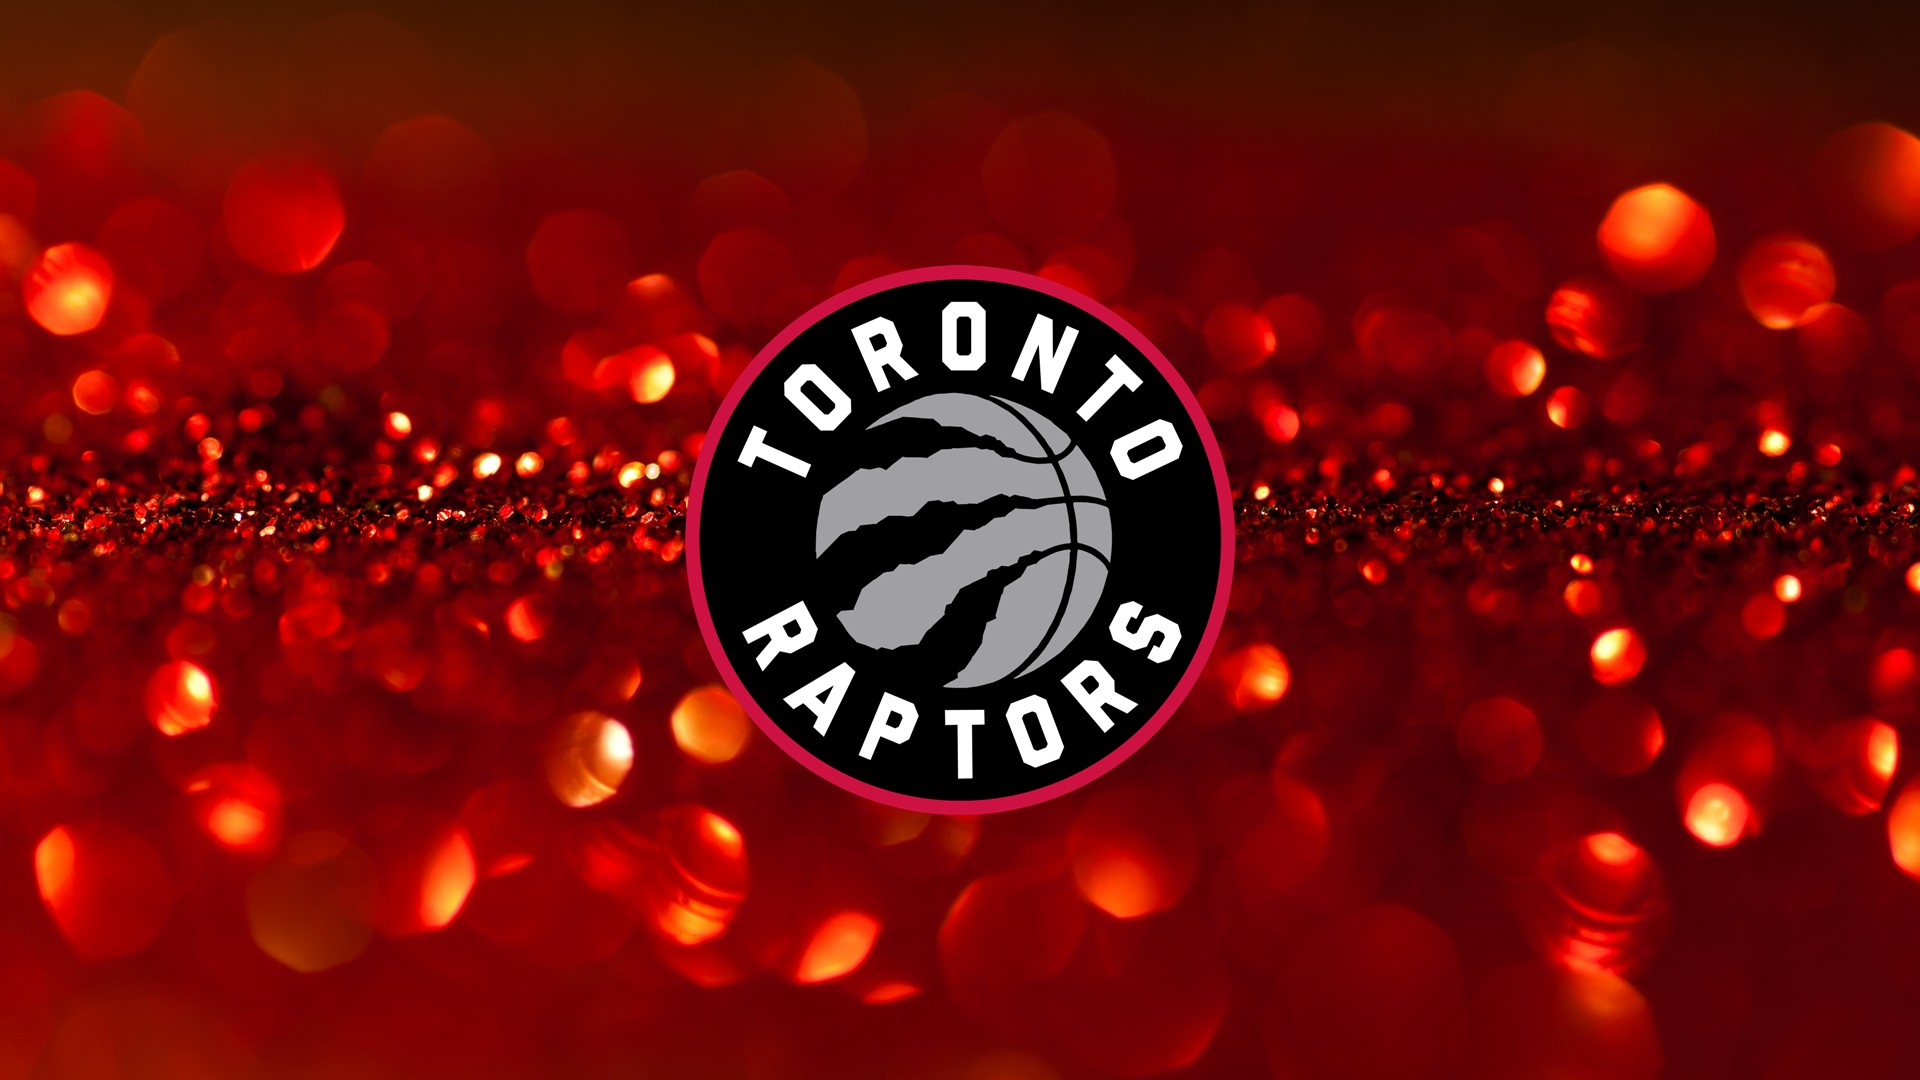 NBA Raptors For Mac Wallpaper with image dimensions 1920X1080 pixel. You can make this wallpaper for your Desktop Computer Backgrounds, Windows or Mac Screensavers, iPhone Lock screen, Tablet or Android and another Mobile Phone device